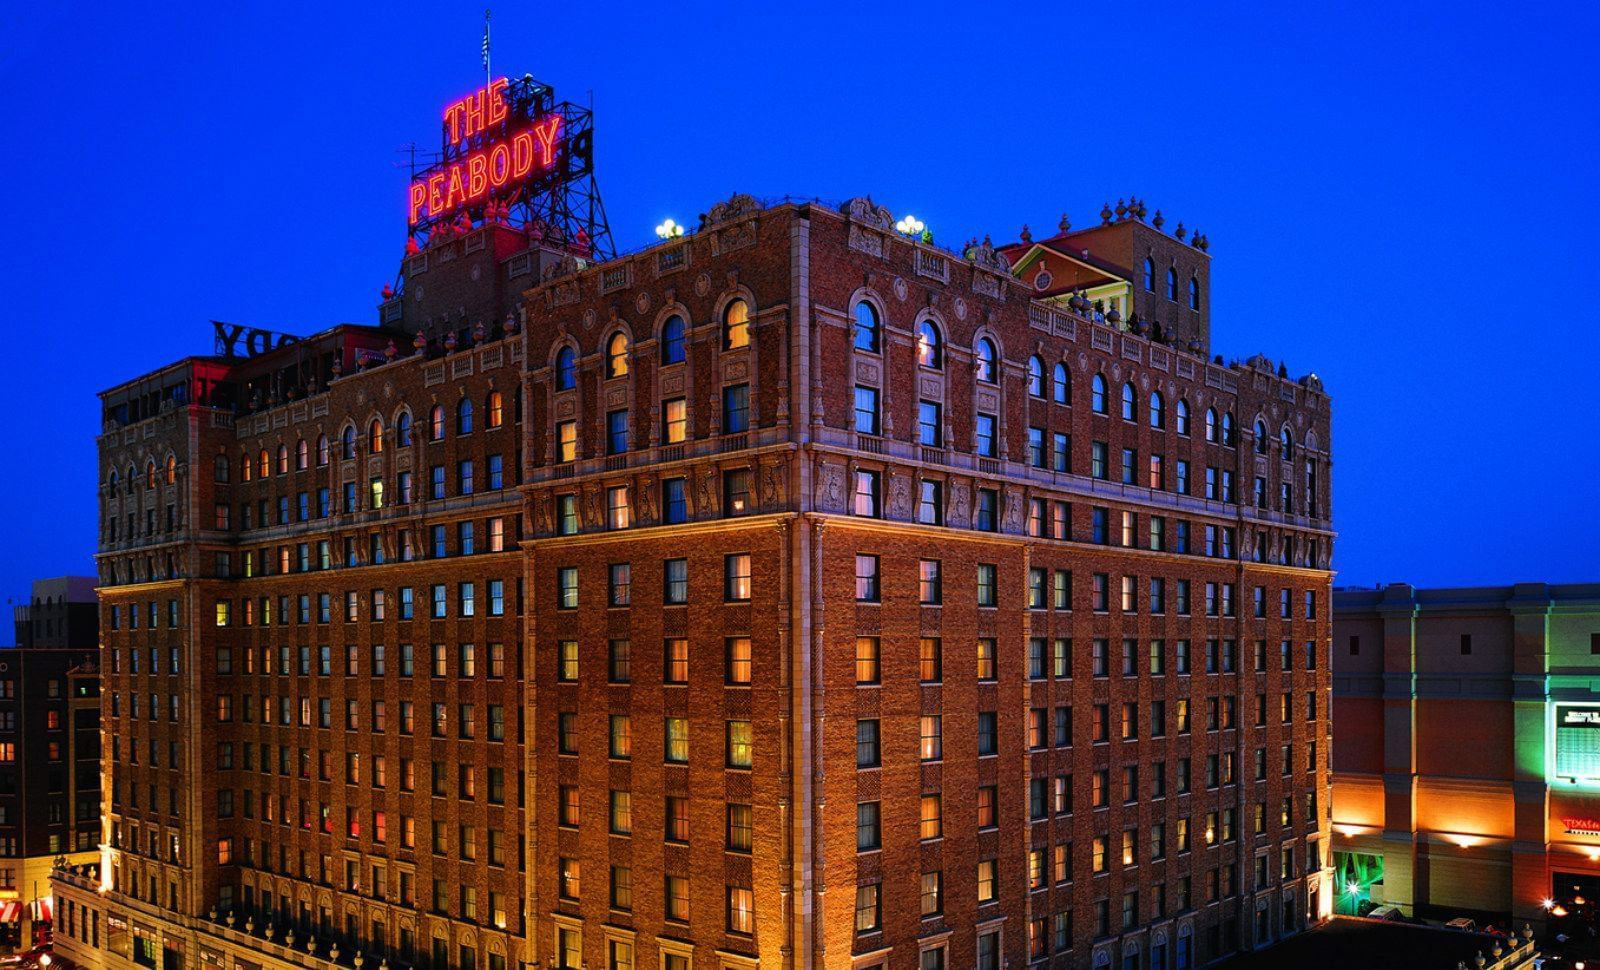 An exterior view of The Peabody Memphis hotel at night